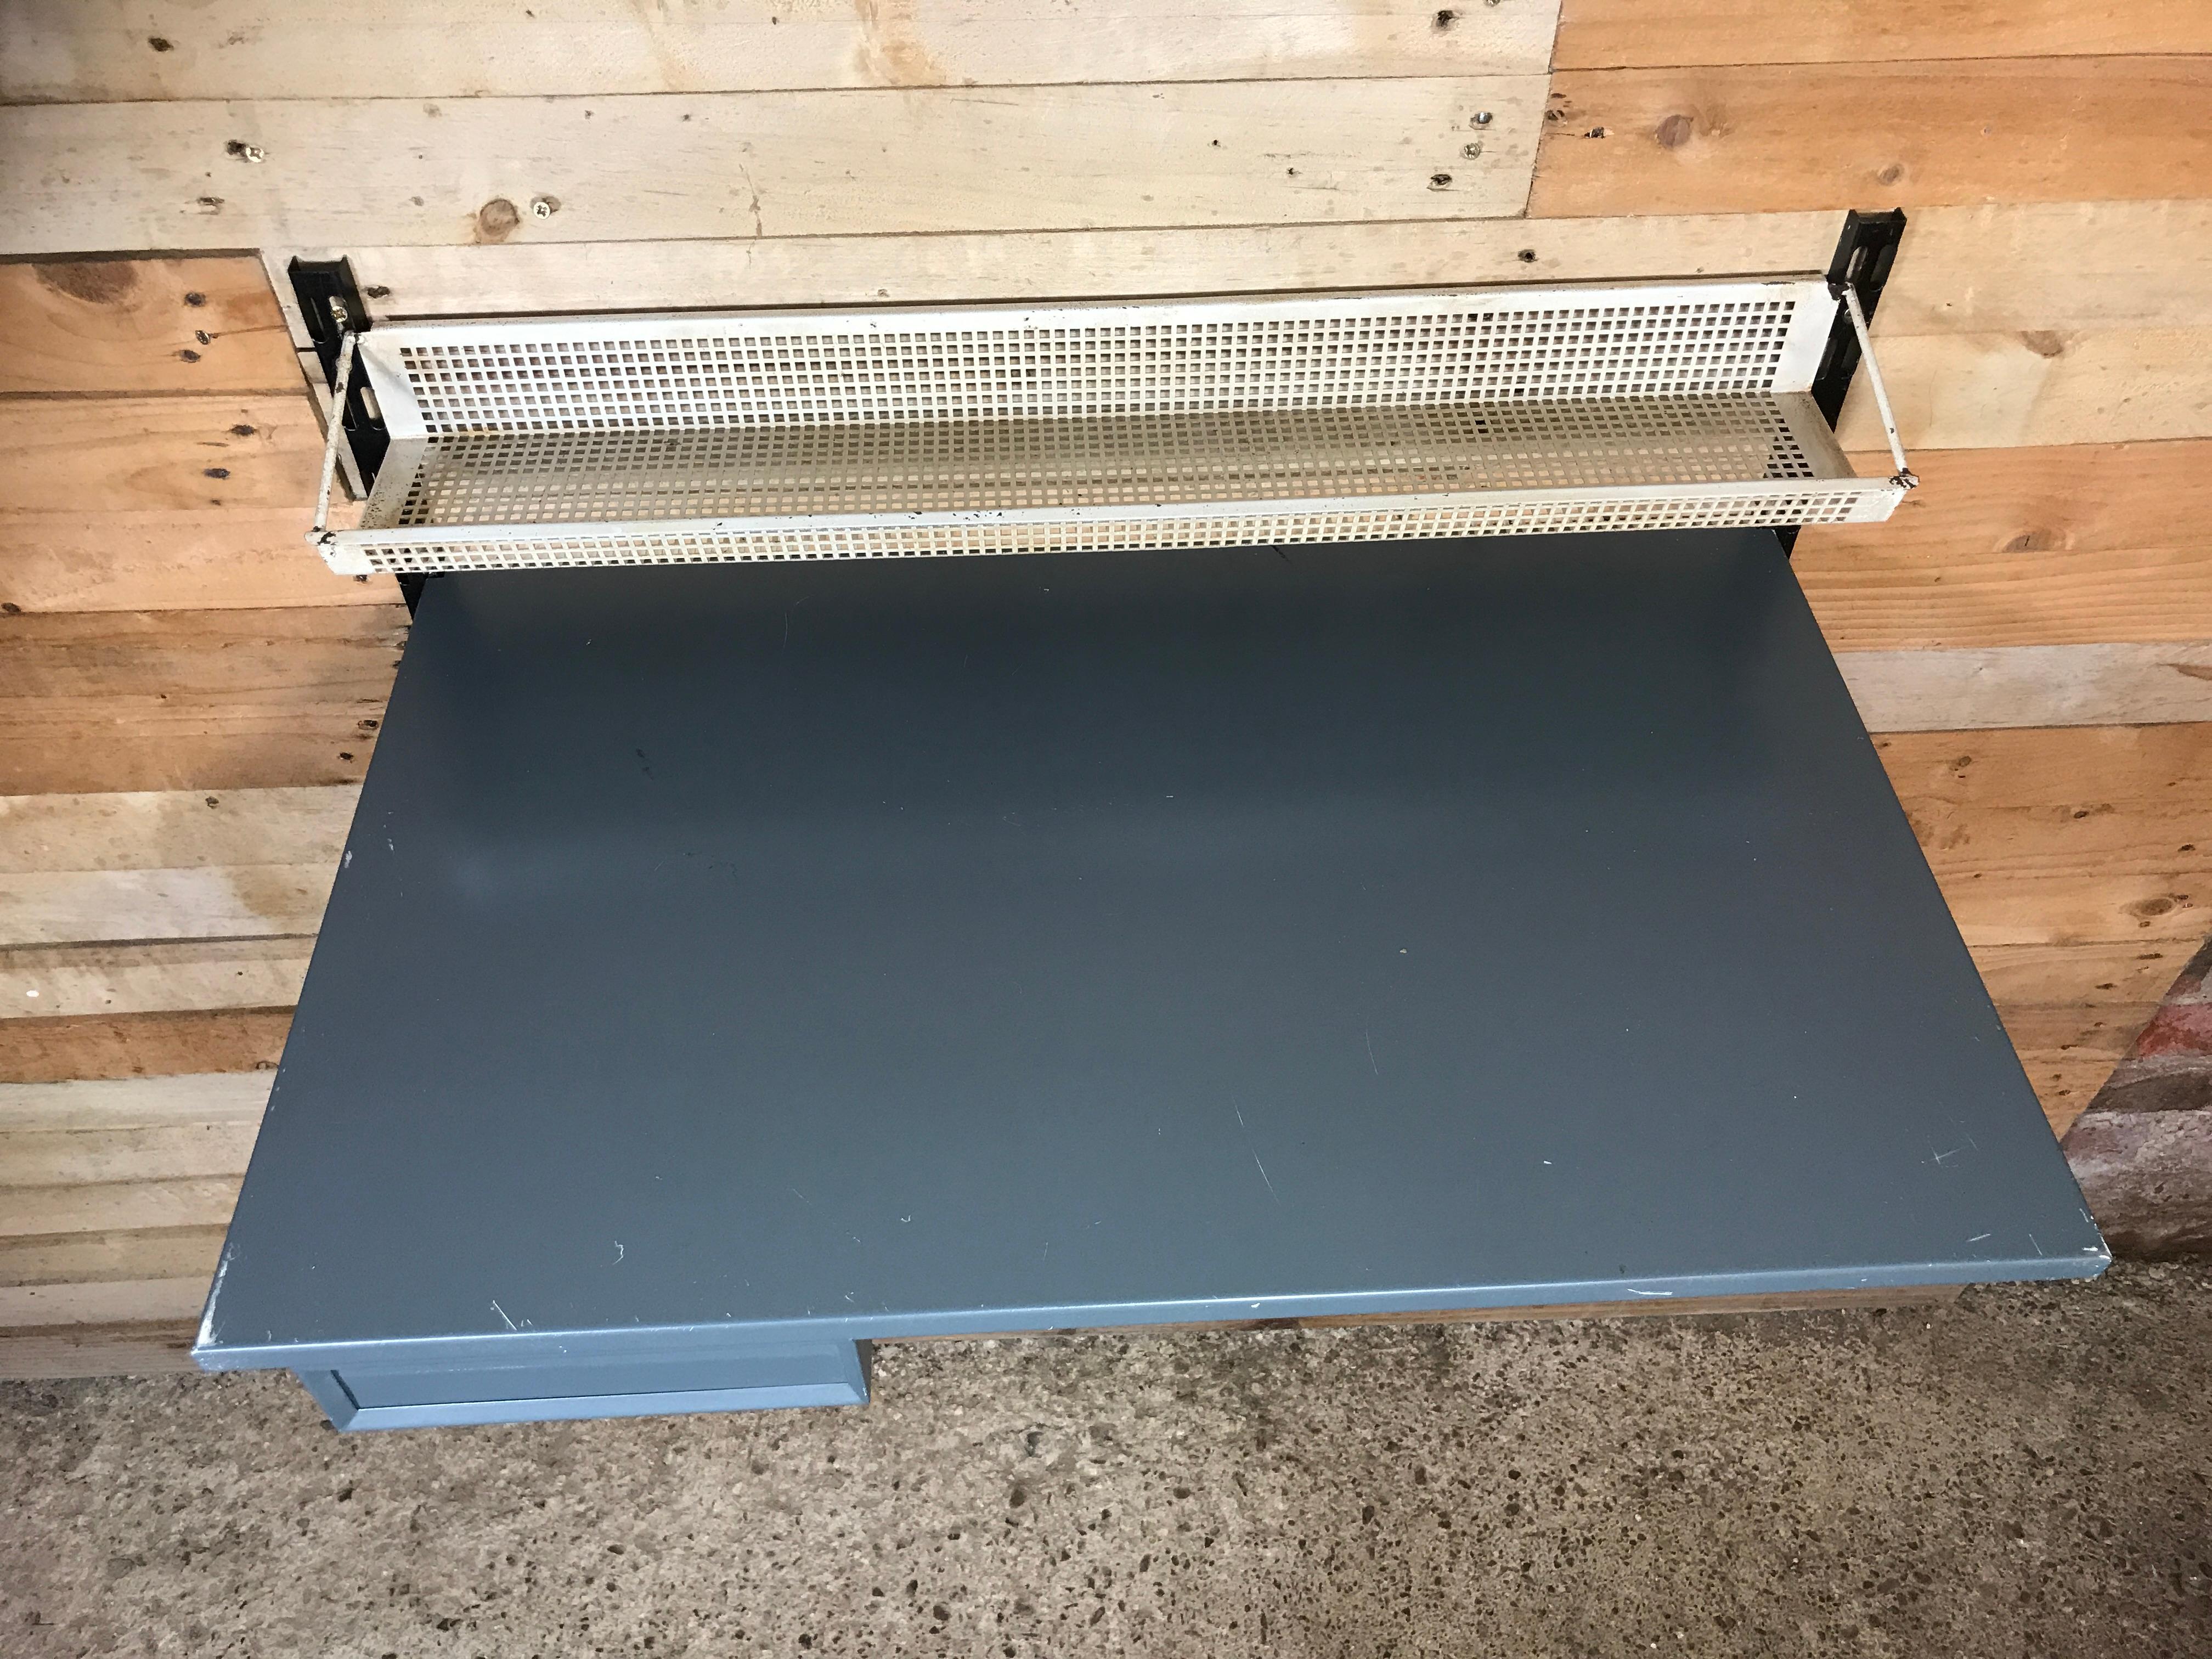 Mid-Century Modern 1960 Retro Pilastro Tomado shelving Grey Metal Desk Unit with Drawer and Shelf For Sale